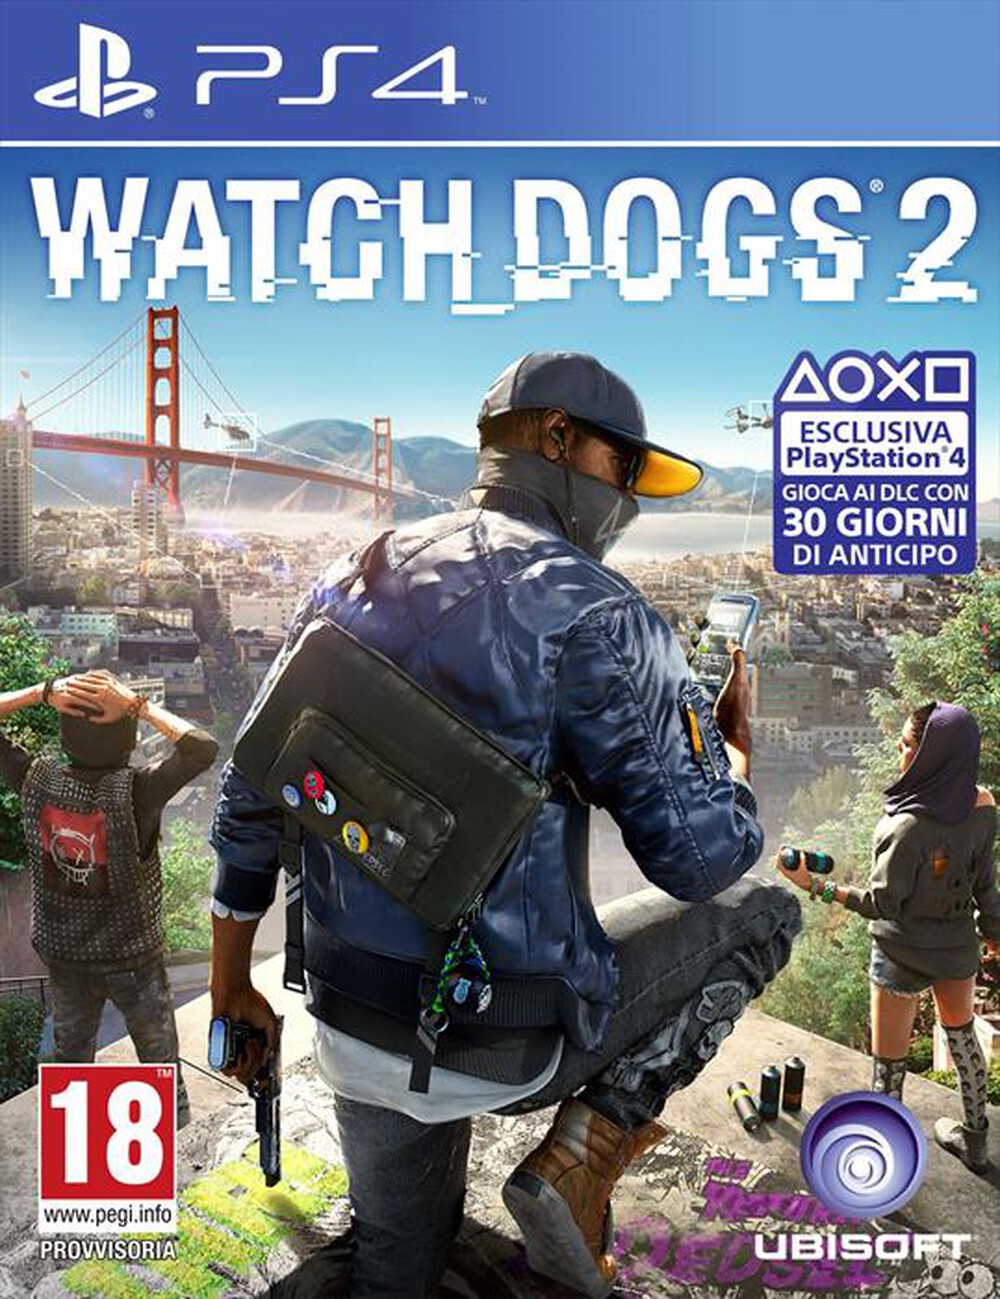 "UBISOFT - Watch Dogs 2 PS4"